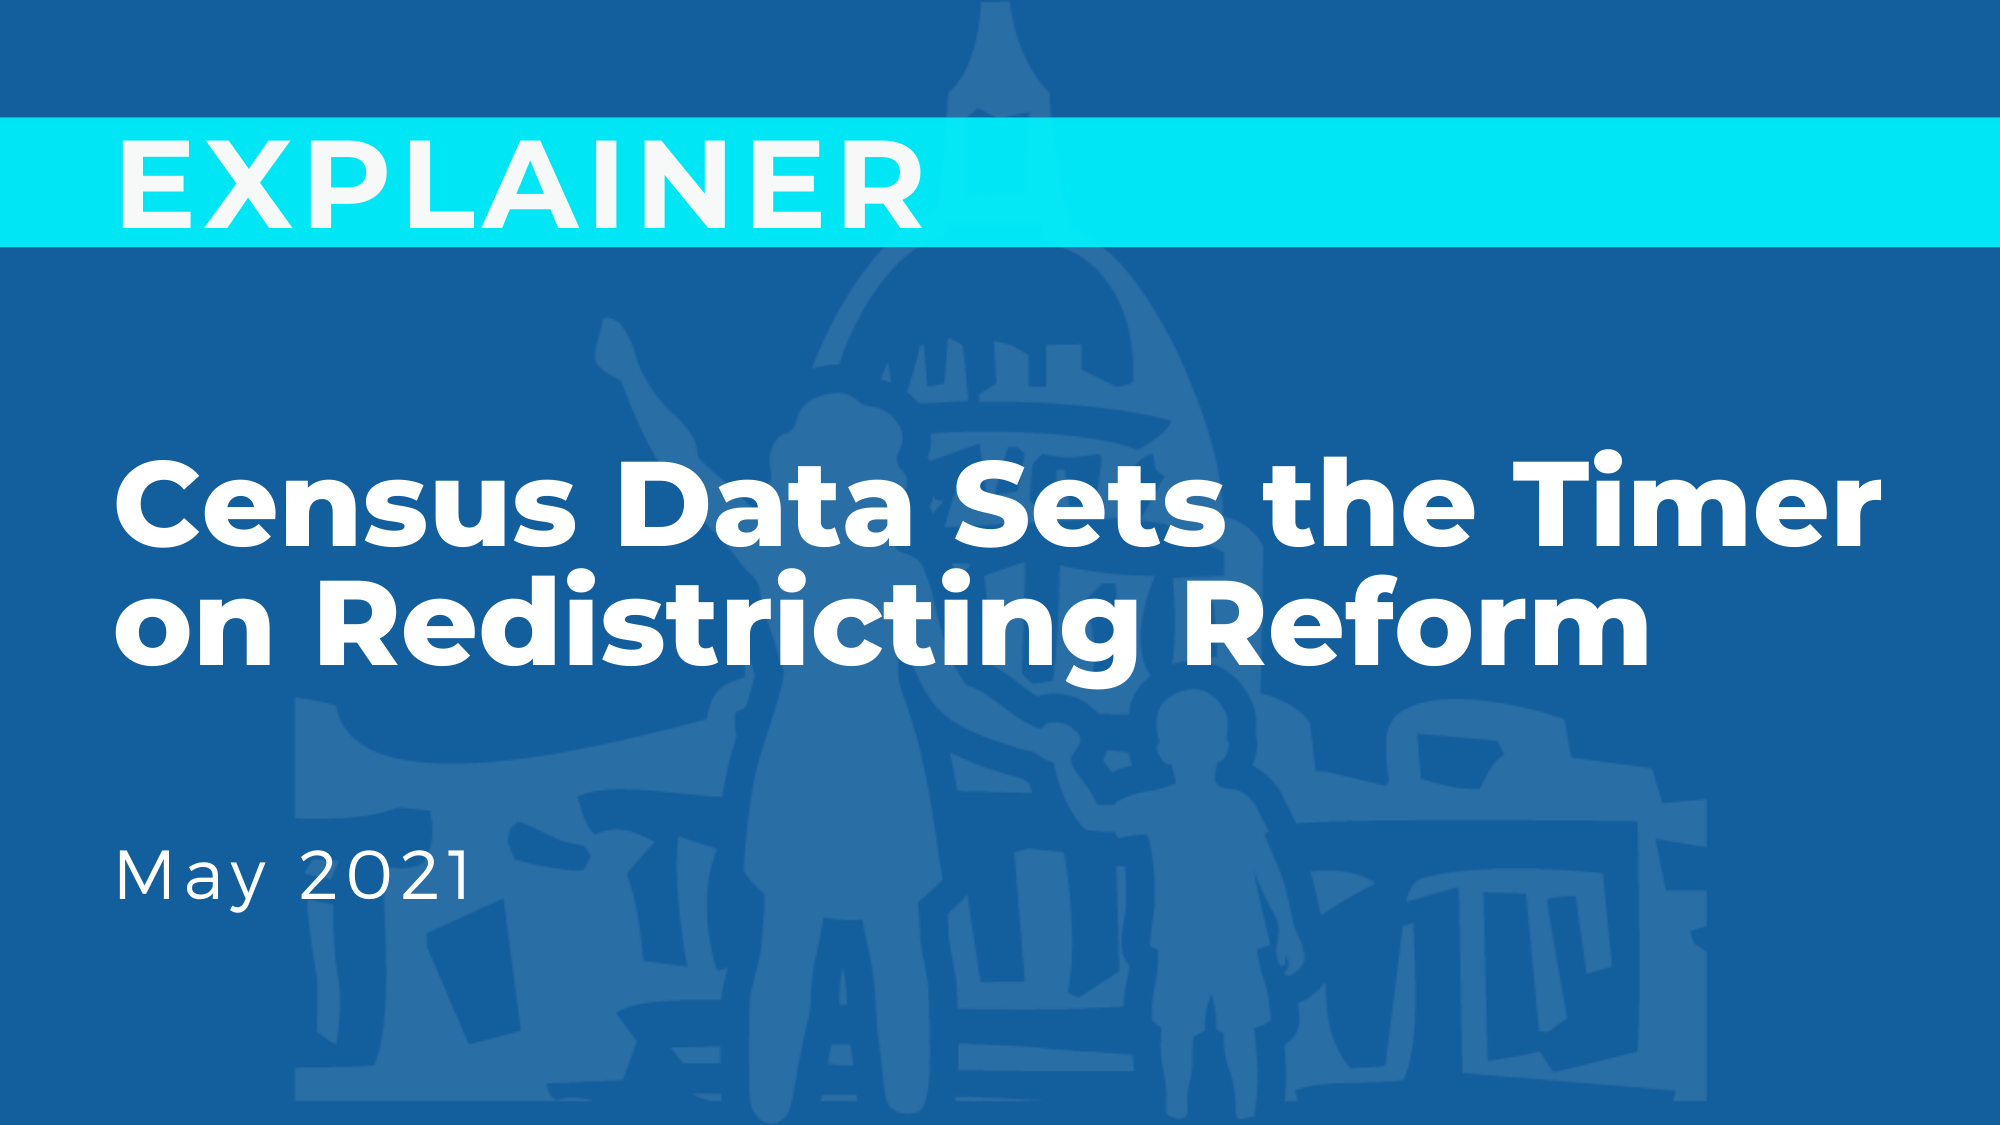 Census Data Sets the Timer on Redistricting Reform